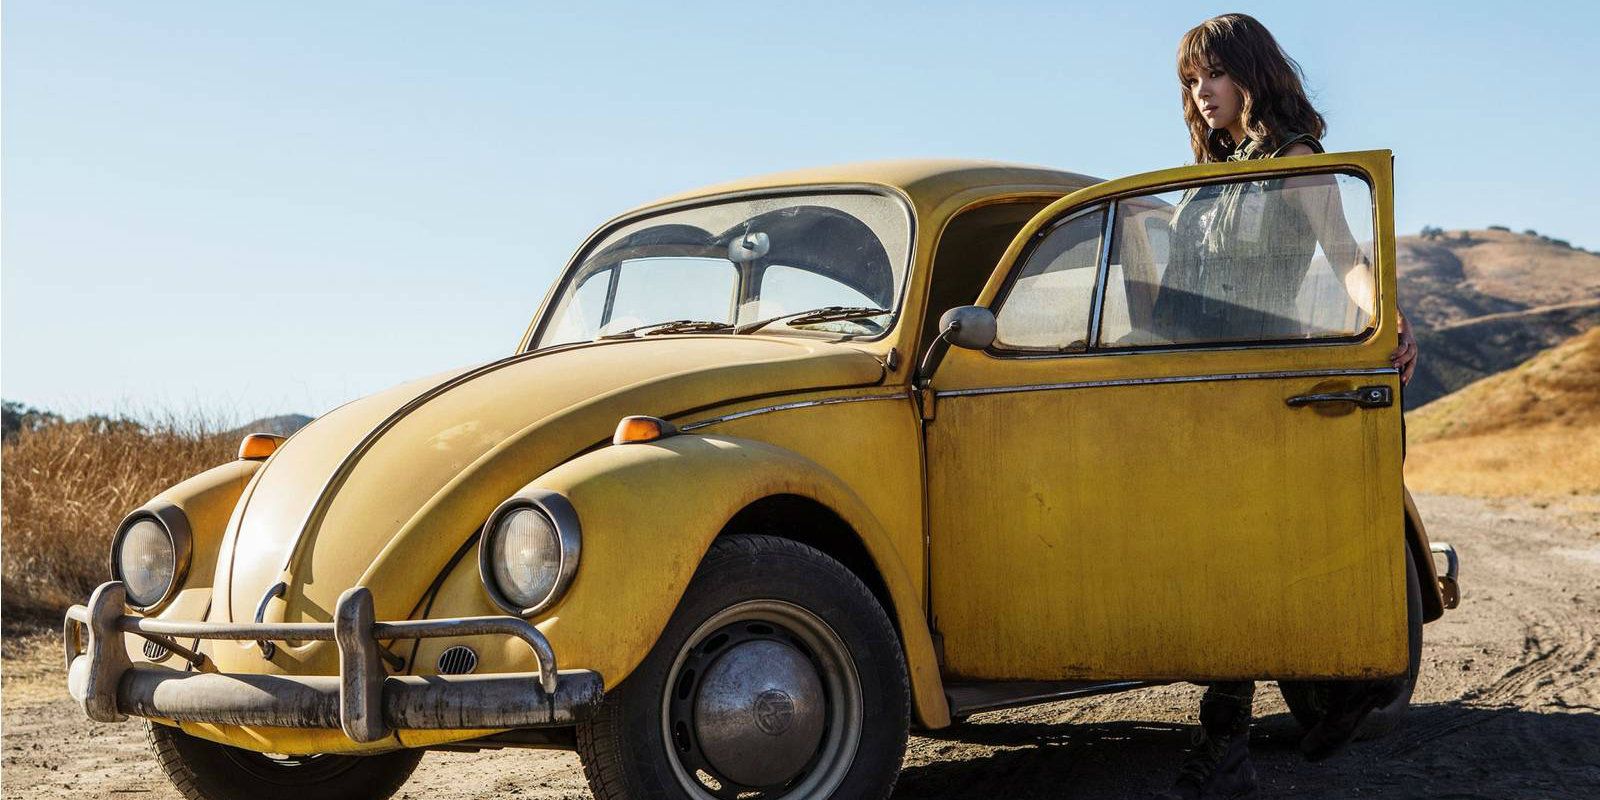 Hailee Steinfeld as Charlie standing outside Bumblebee's car in the Bumblebee Movie